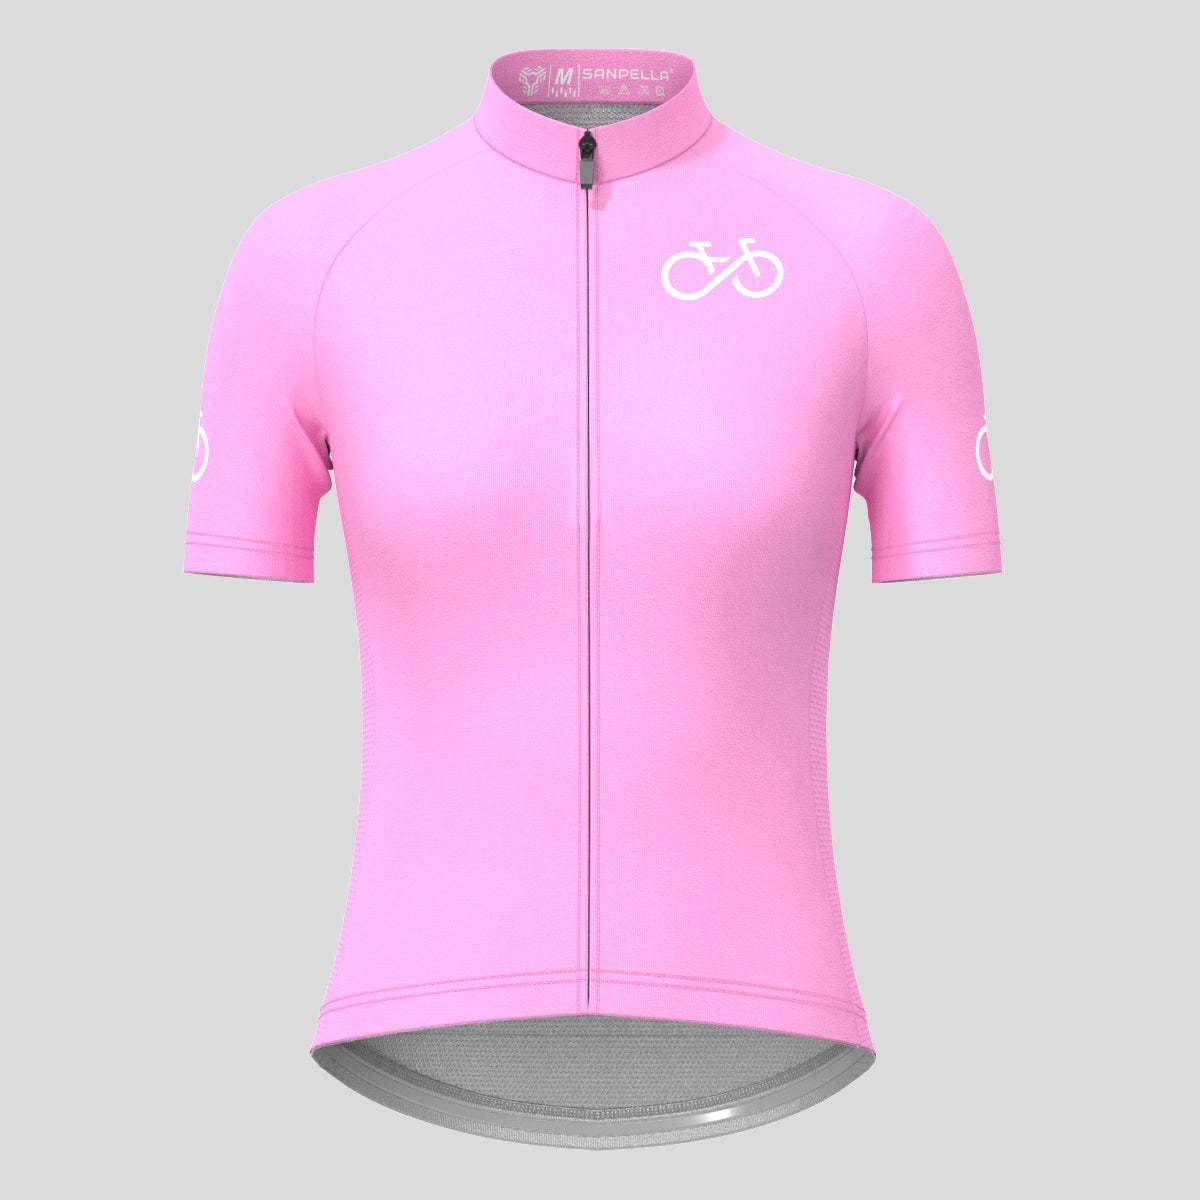 Ride Forever Women's Cycling Jersey - Neo Pink